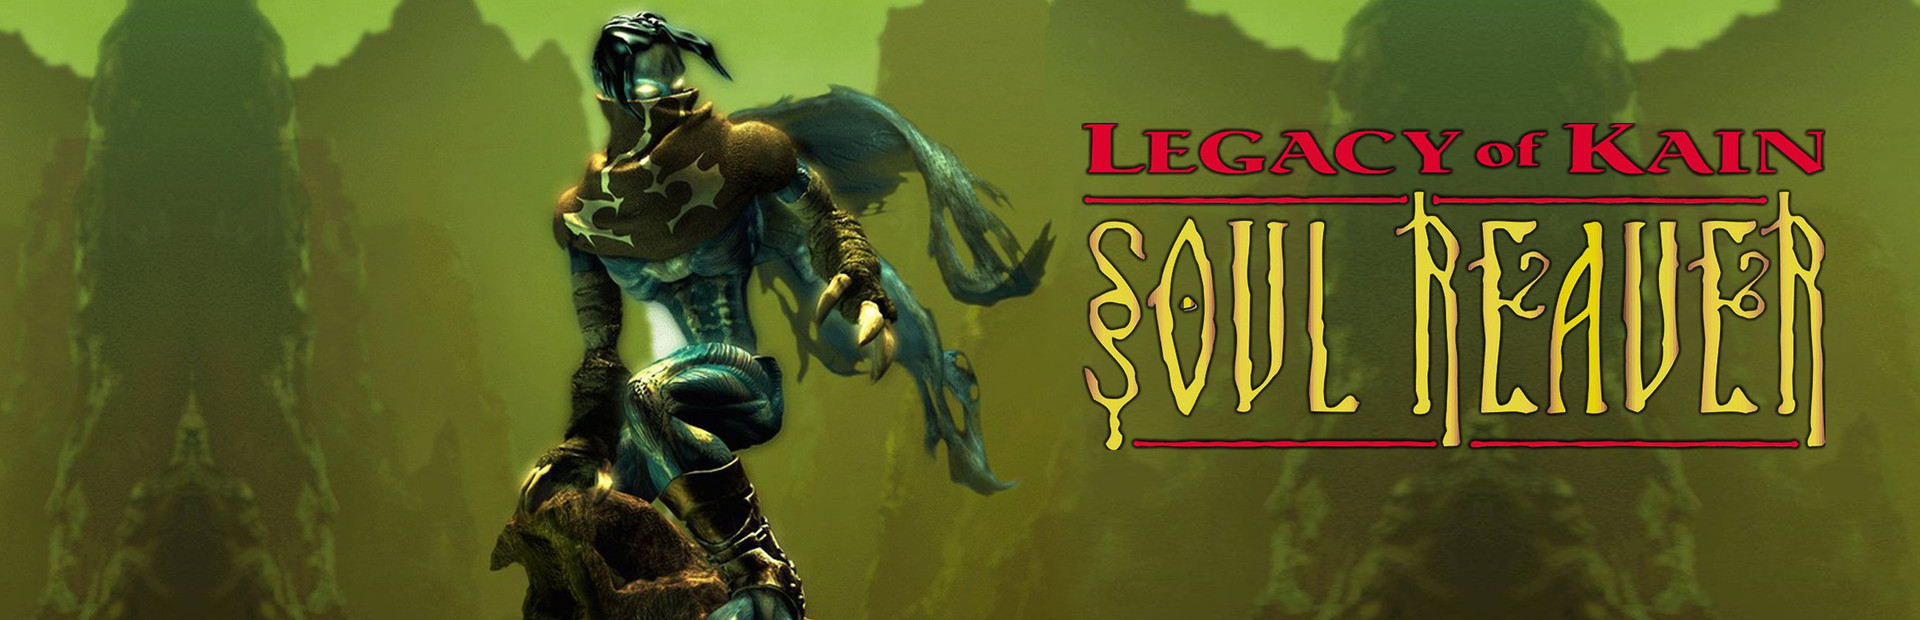 Legacy of kain on steam фото 31